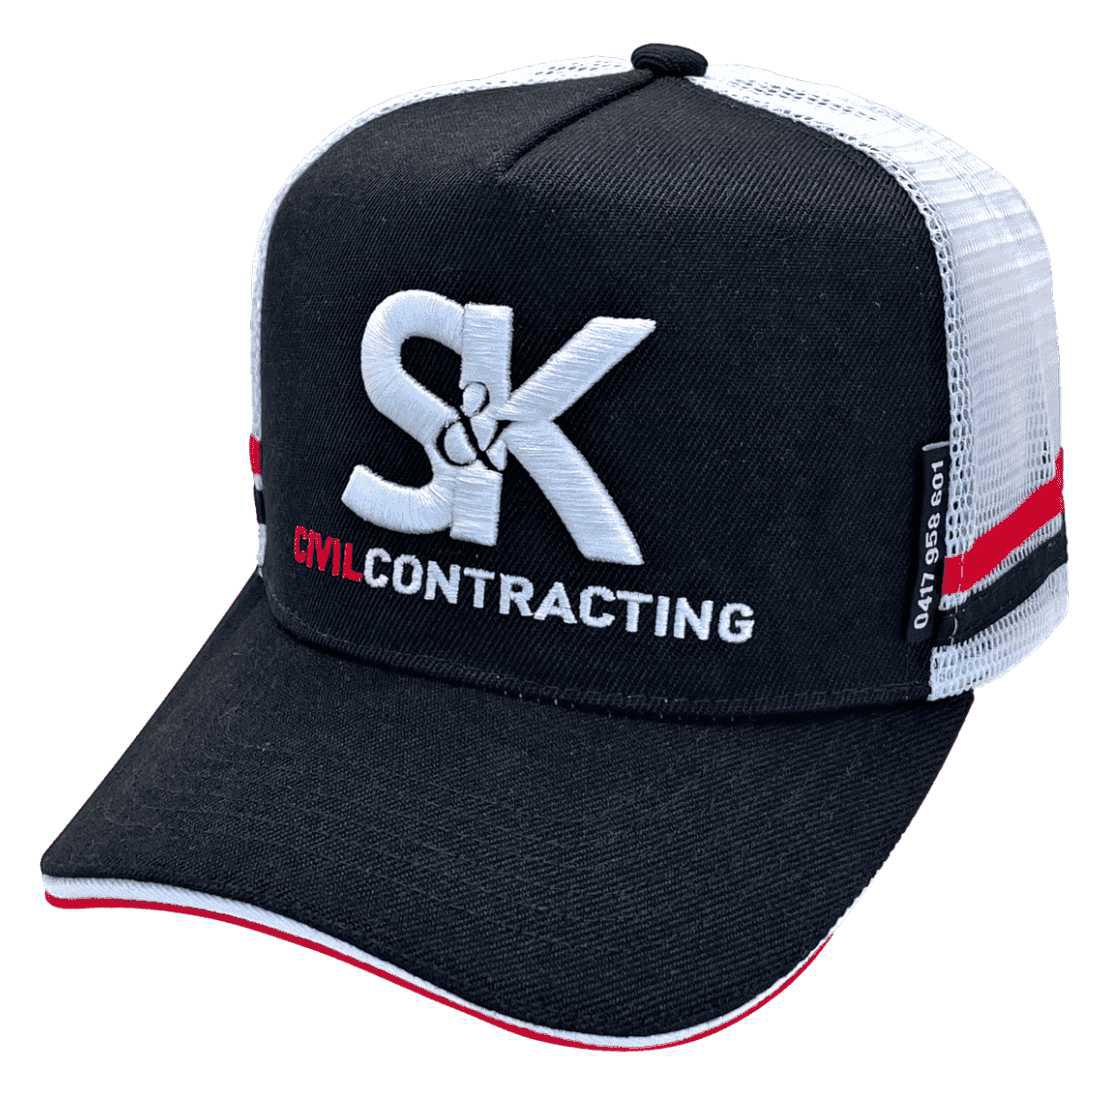 S and K Civil Contracting Atherton Qld HP Original Power Aussie Trucker Hat with Australian Head Fit Crown and Sandwich Brim